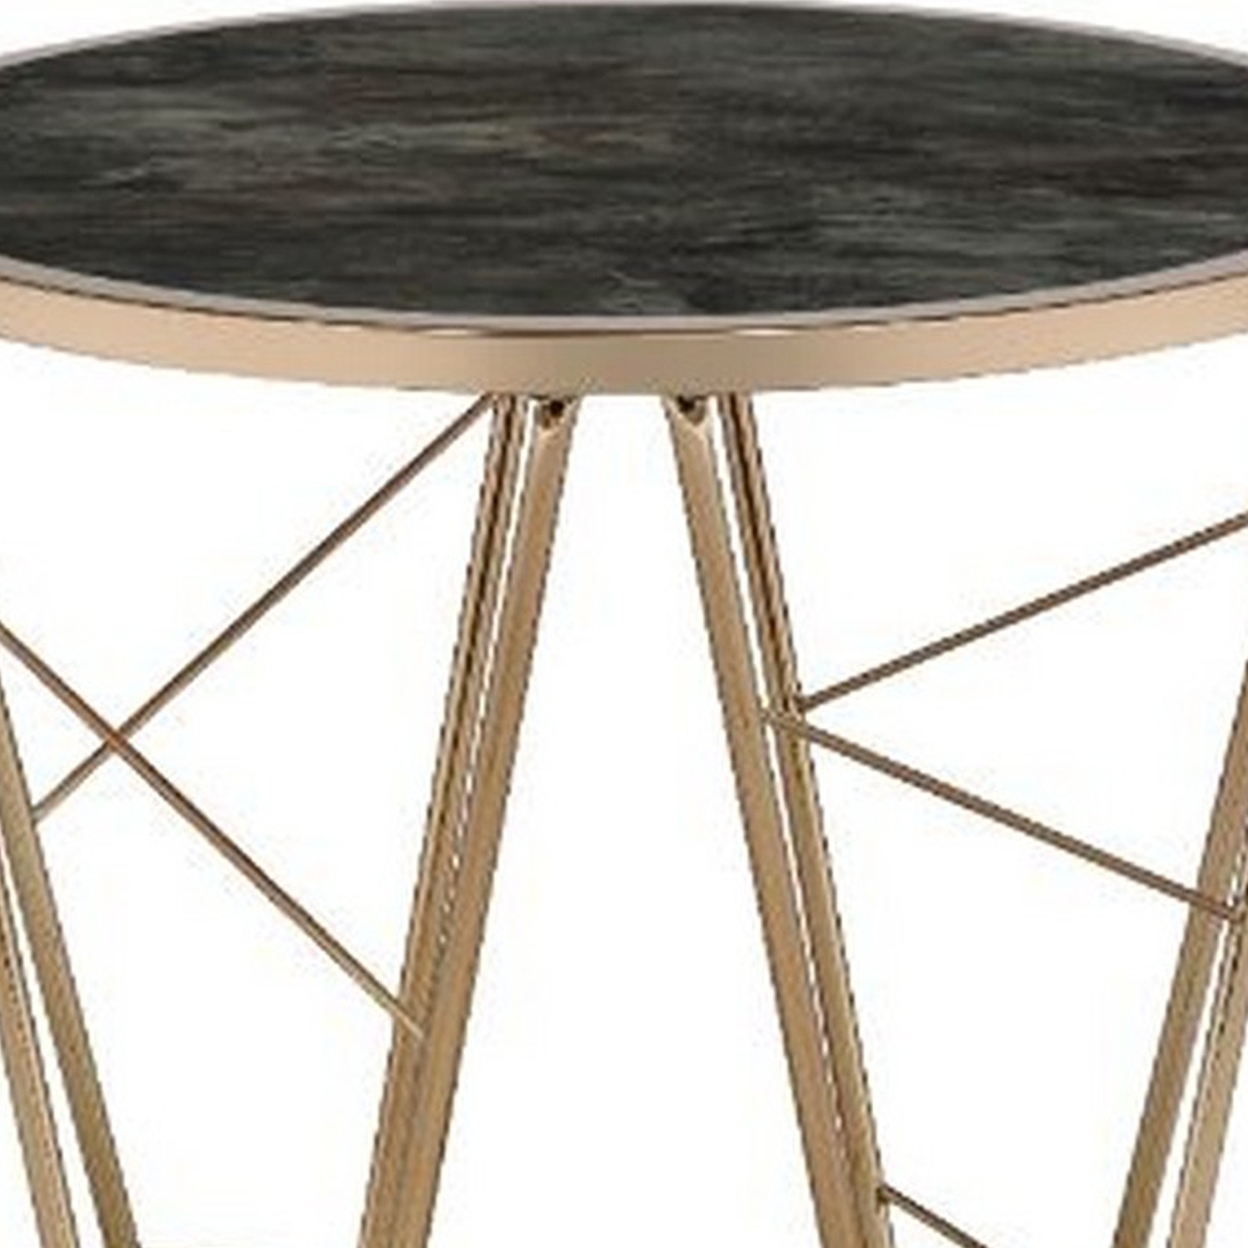 End Table With Glass Top And Geometric Frame, Black And Gold- Saltoro Sherpi